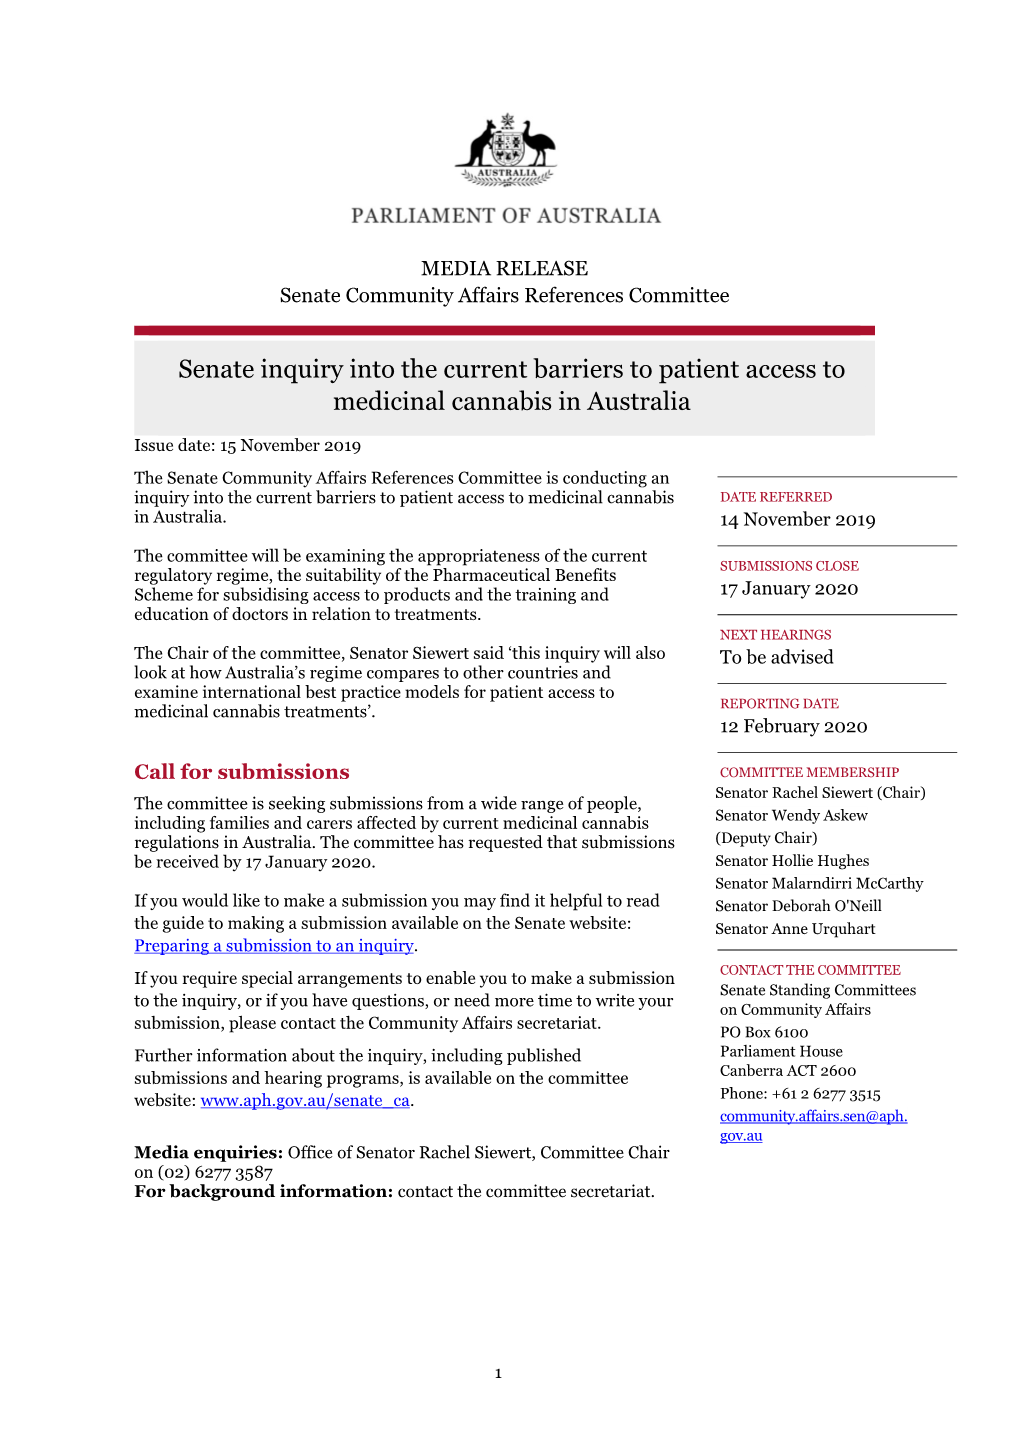 Senate Inquiry Into the Current Barriers to Patient Access to Medicinal Cannabis in Australia